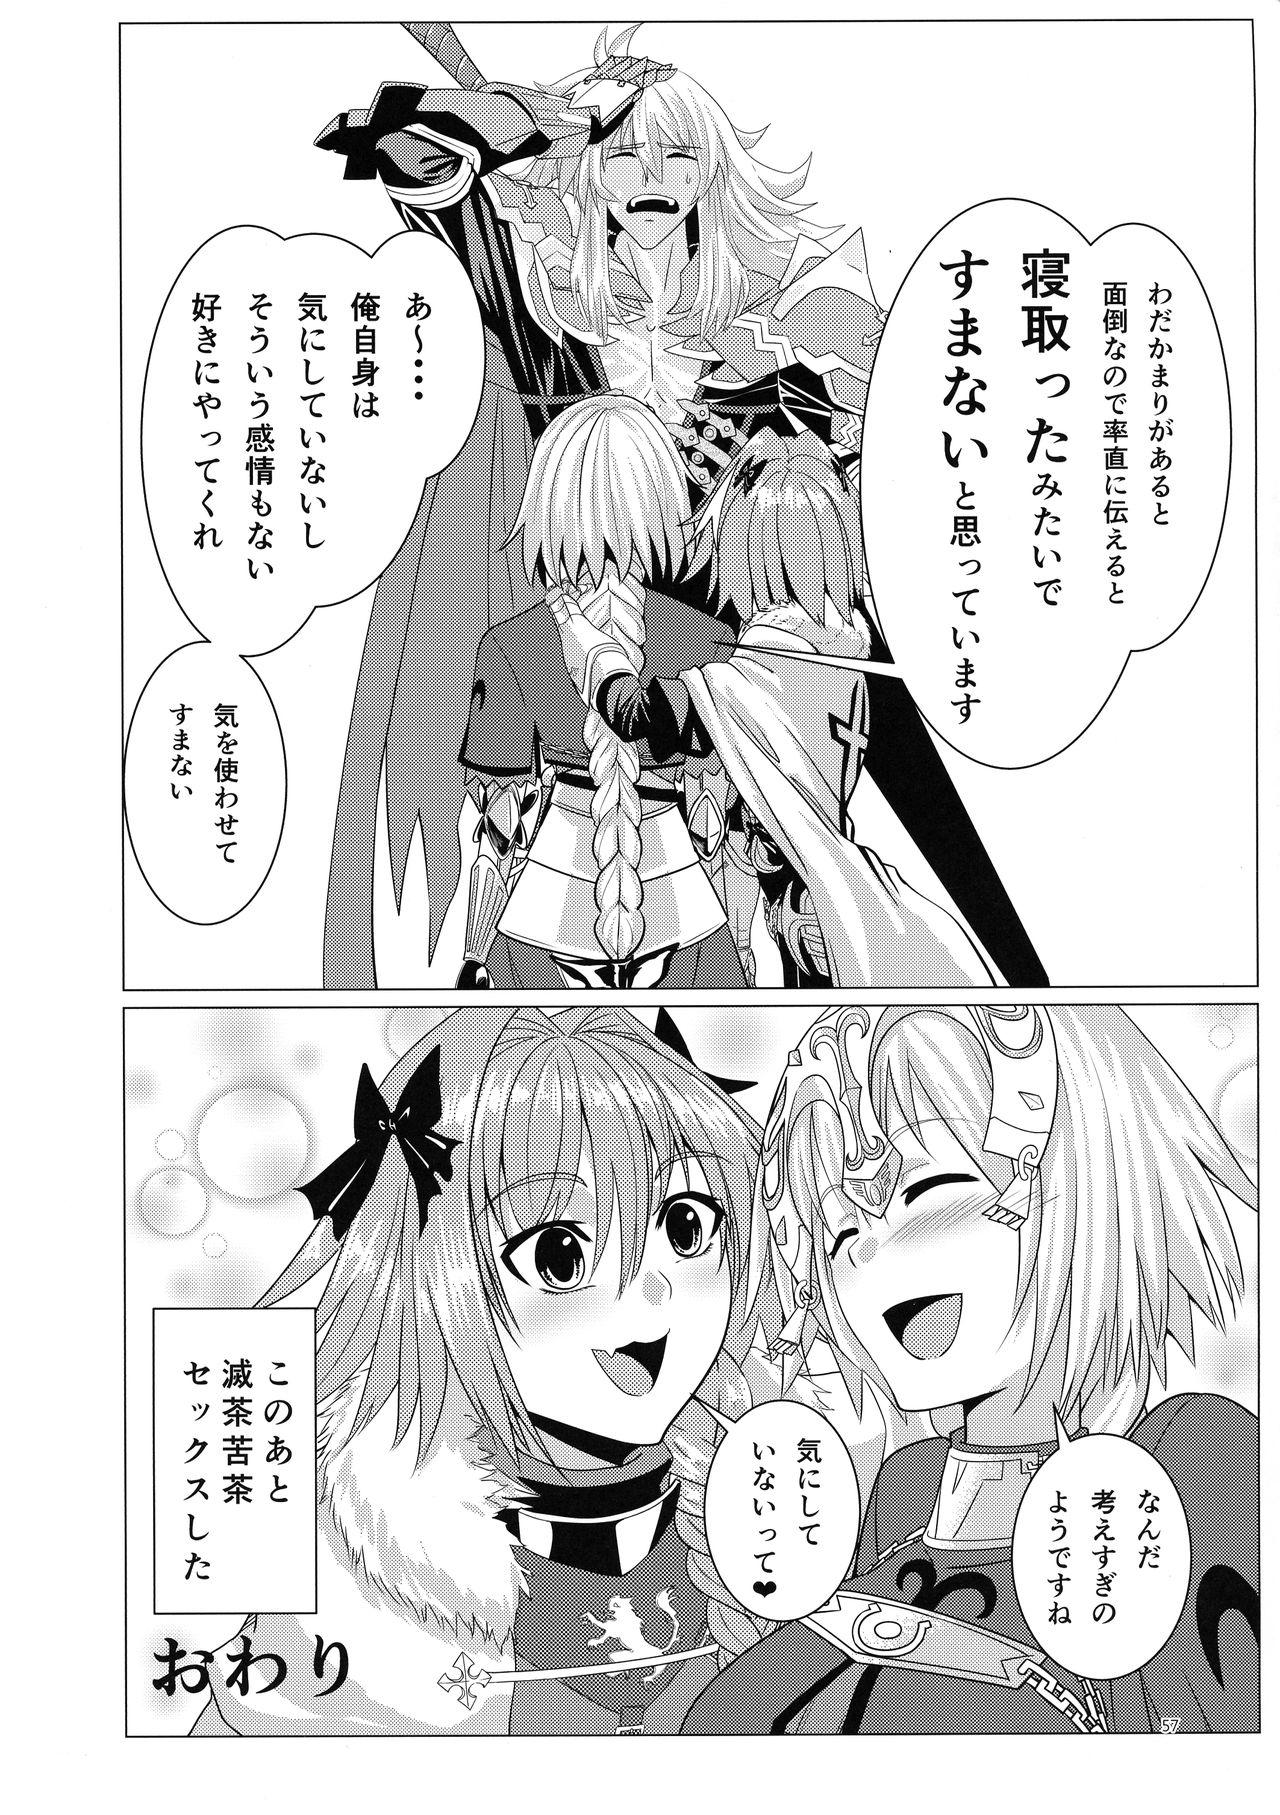 Matching Spirits - Jeanne and Astolfo have sex 53